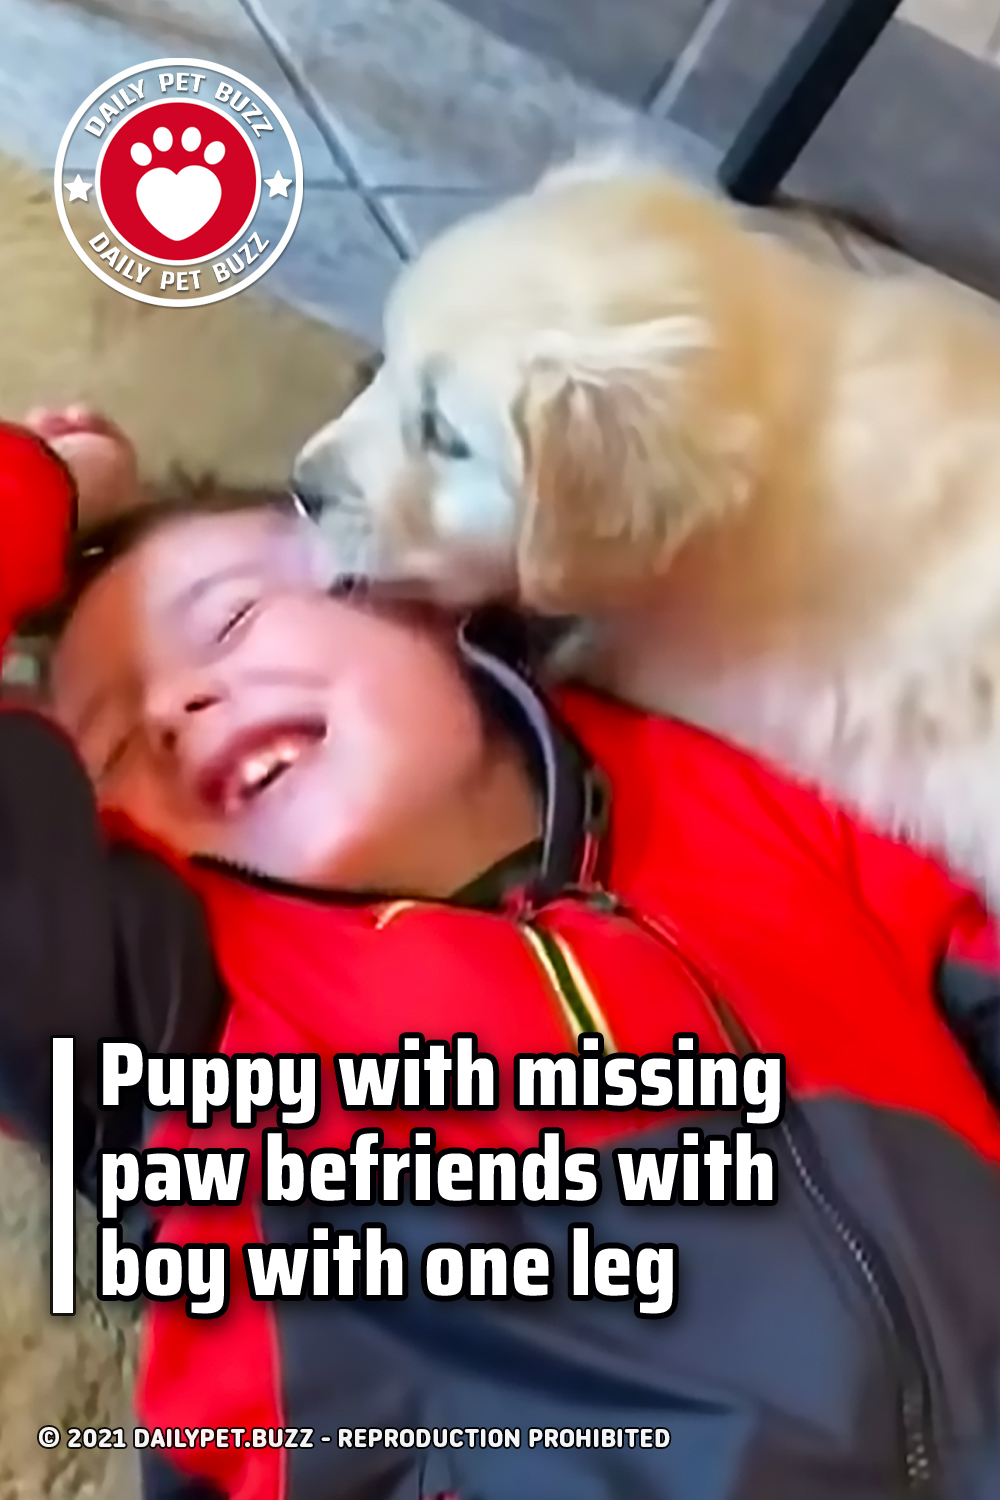 Puppy with missing paw befriends with boy with one leg